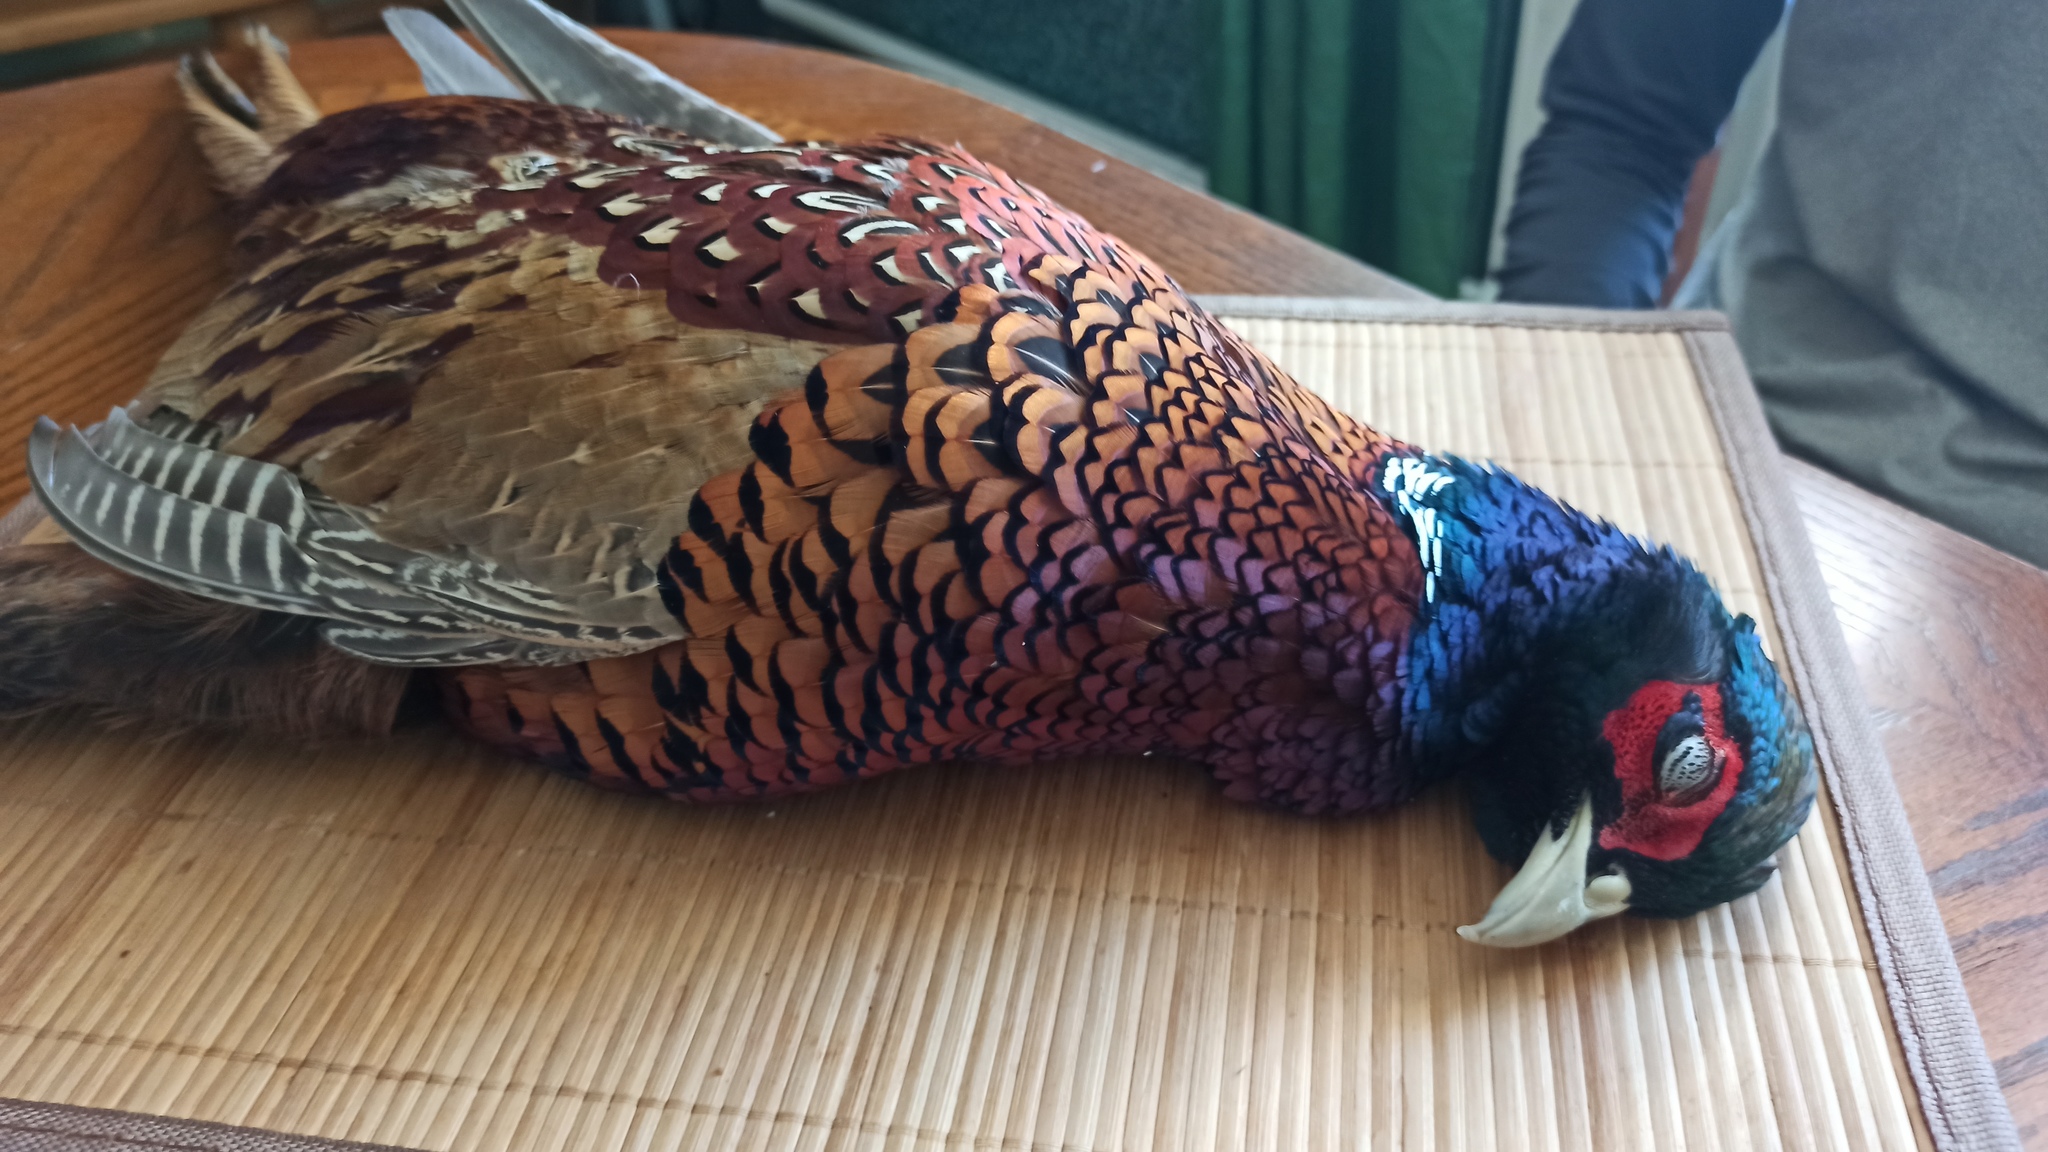 The morning begins with game! - My, Game, Pheasant, Life stories